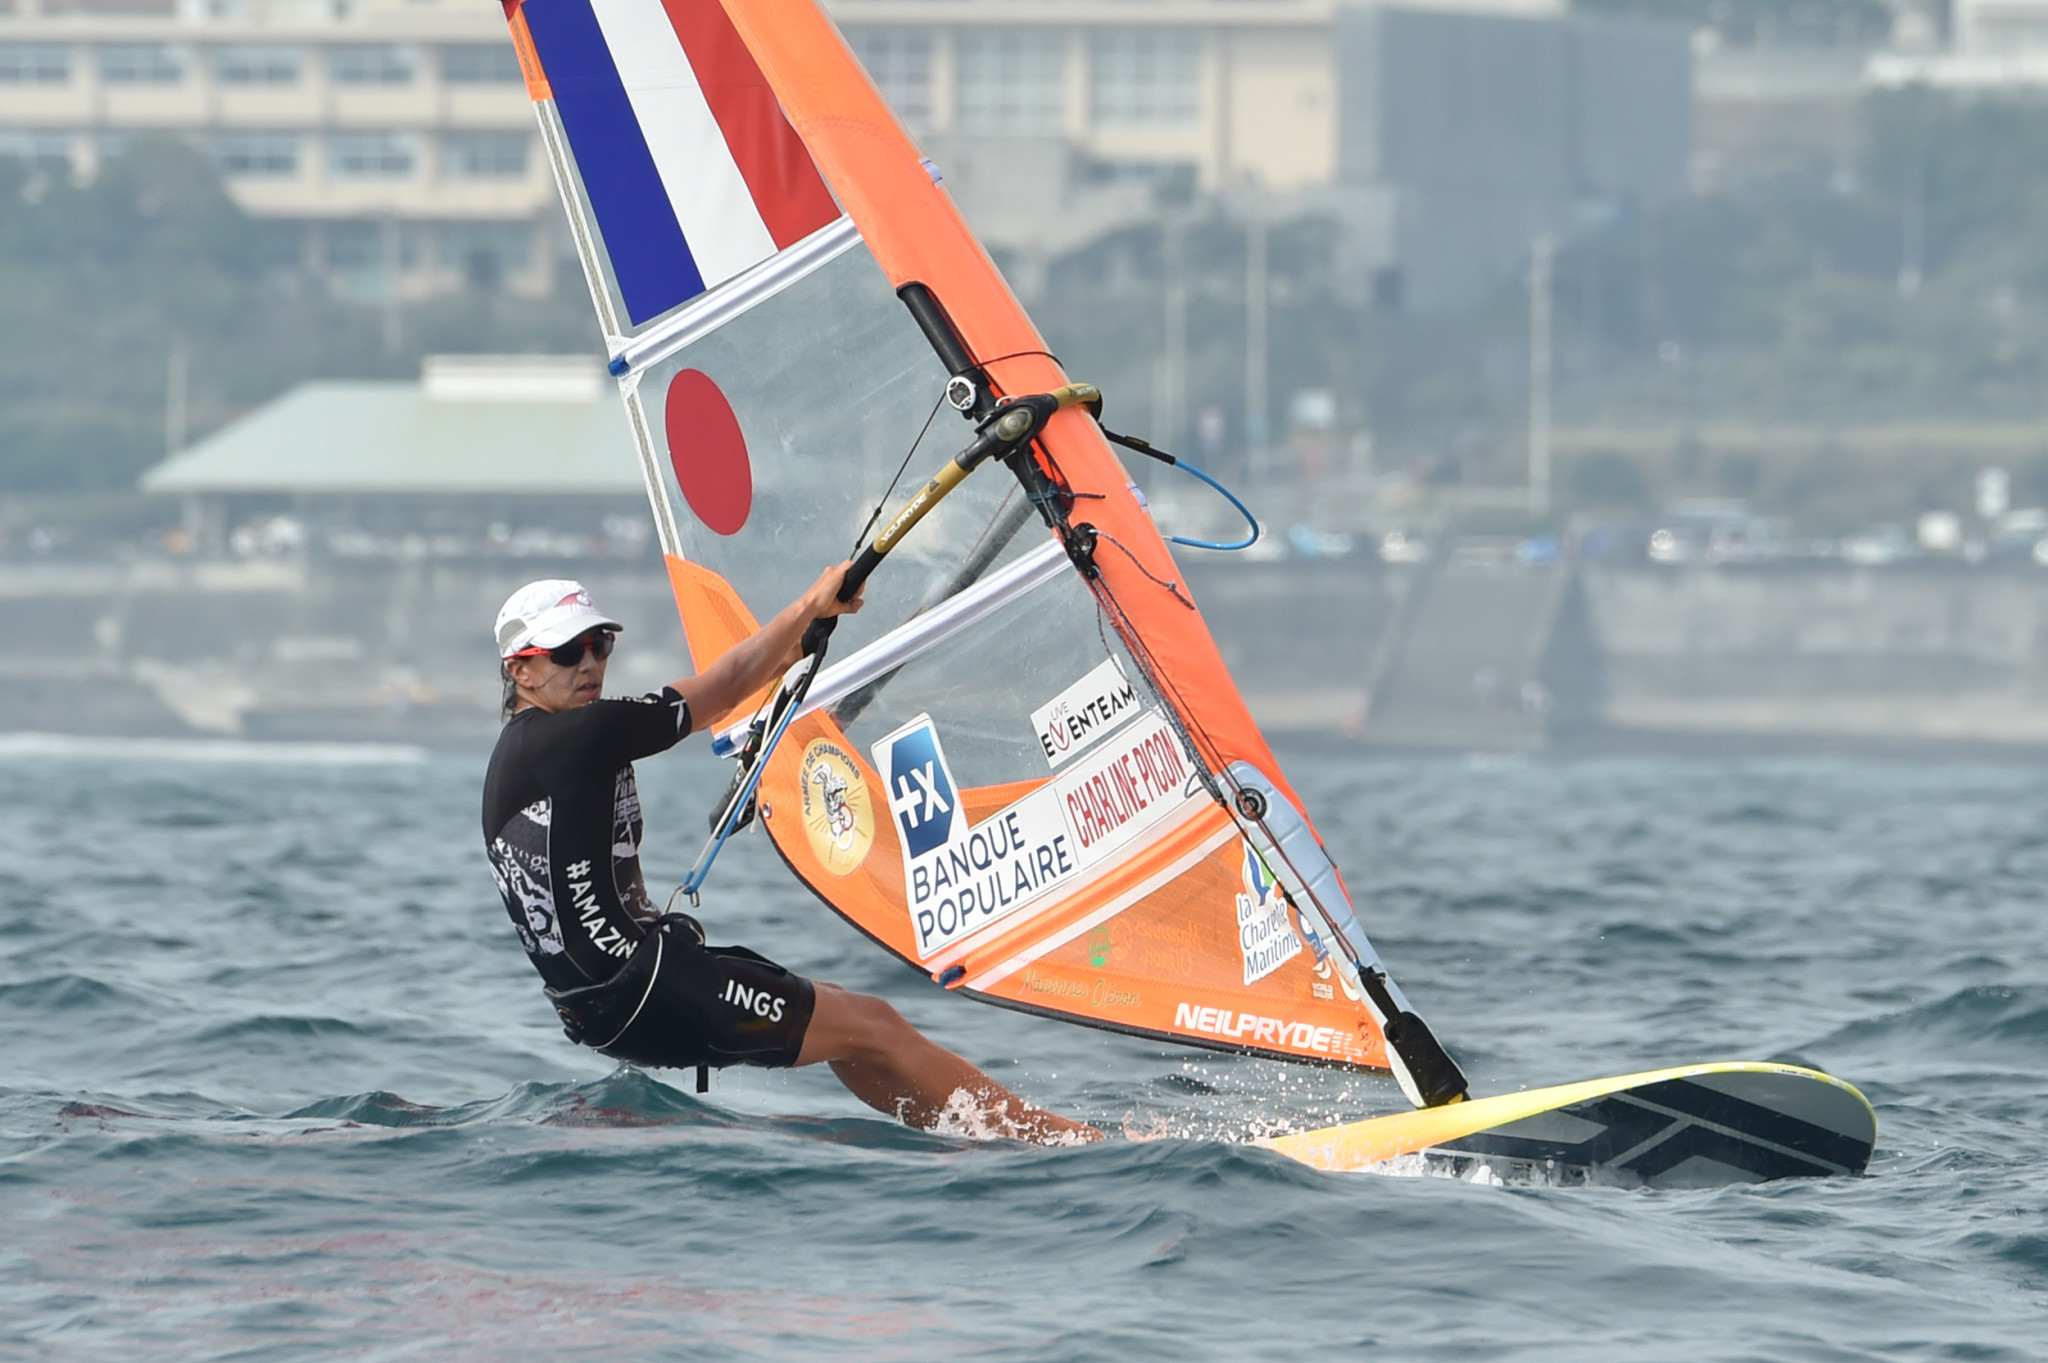 Picon and Cohen strengthen leads at RS:X European Championships in Vilamoura